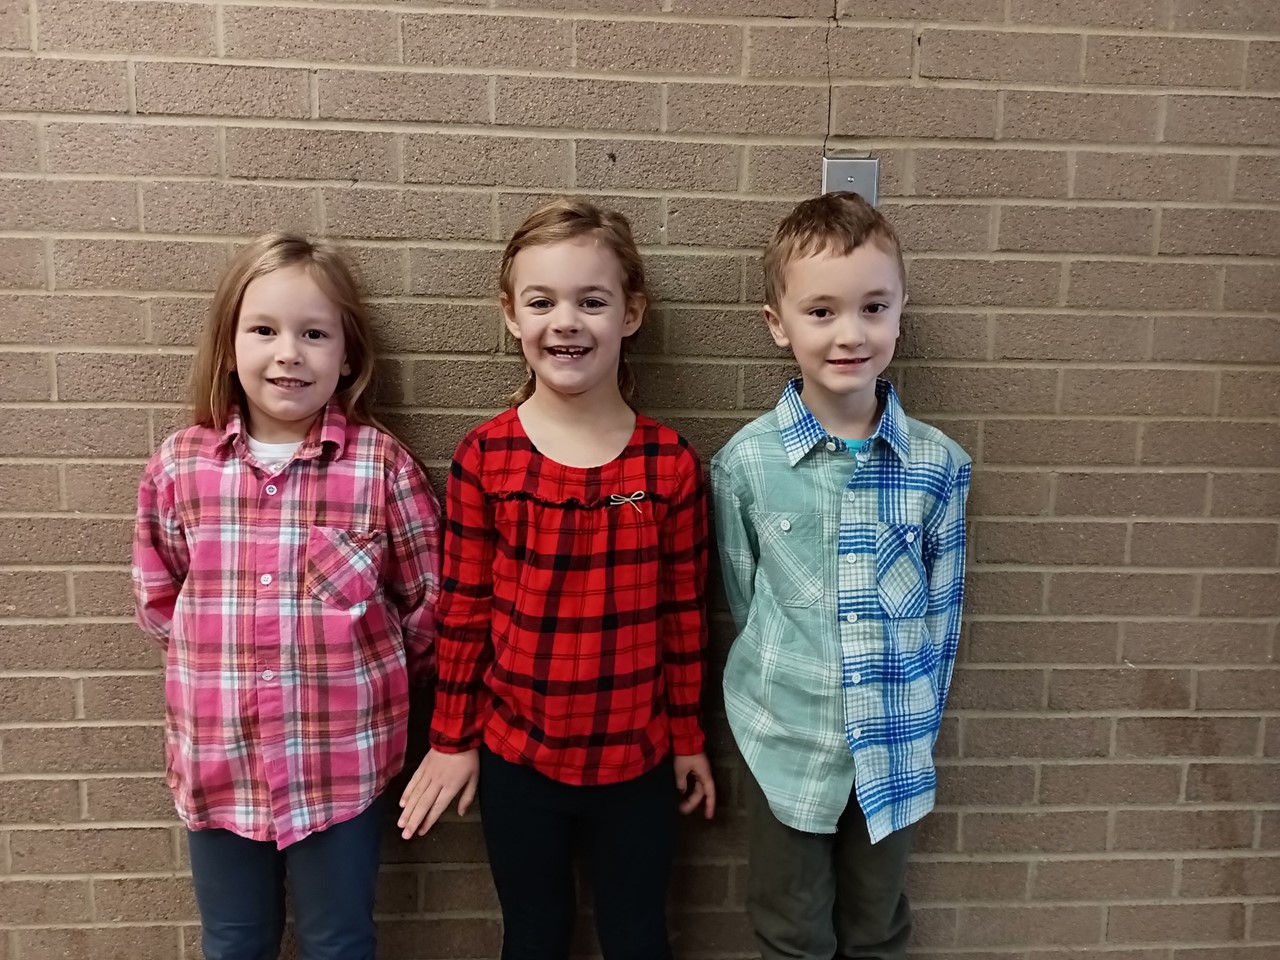 Mad about Plaid Day